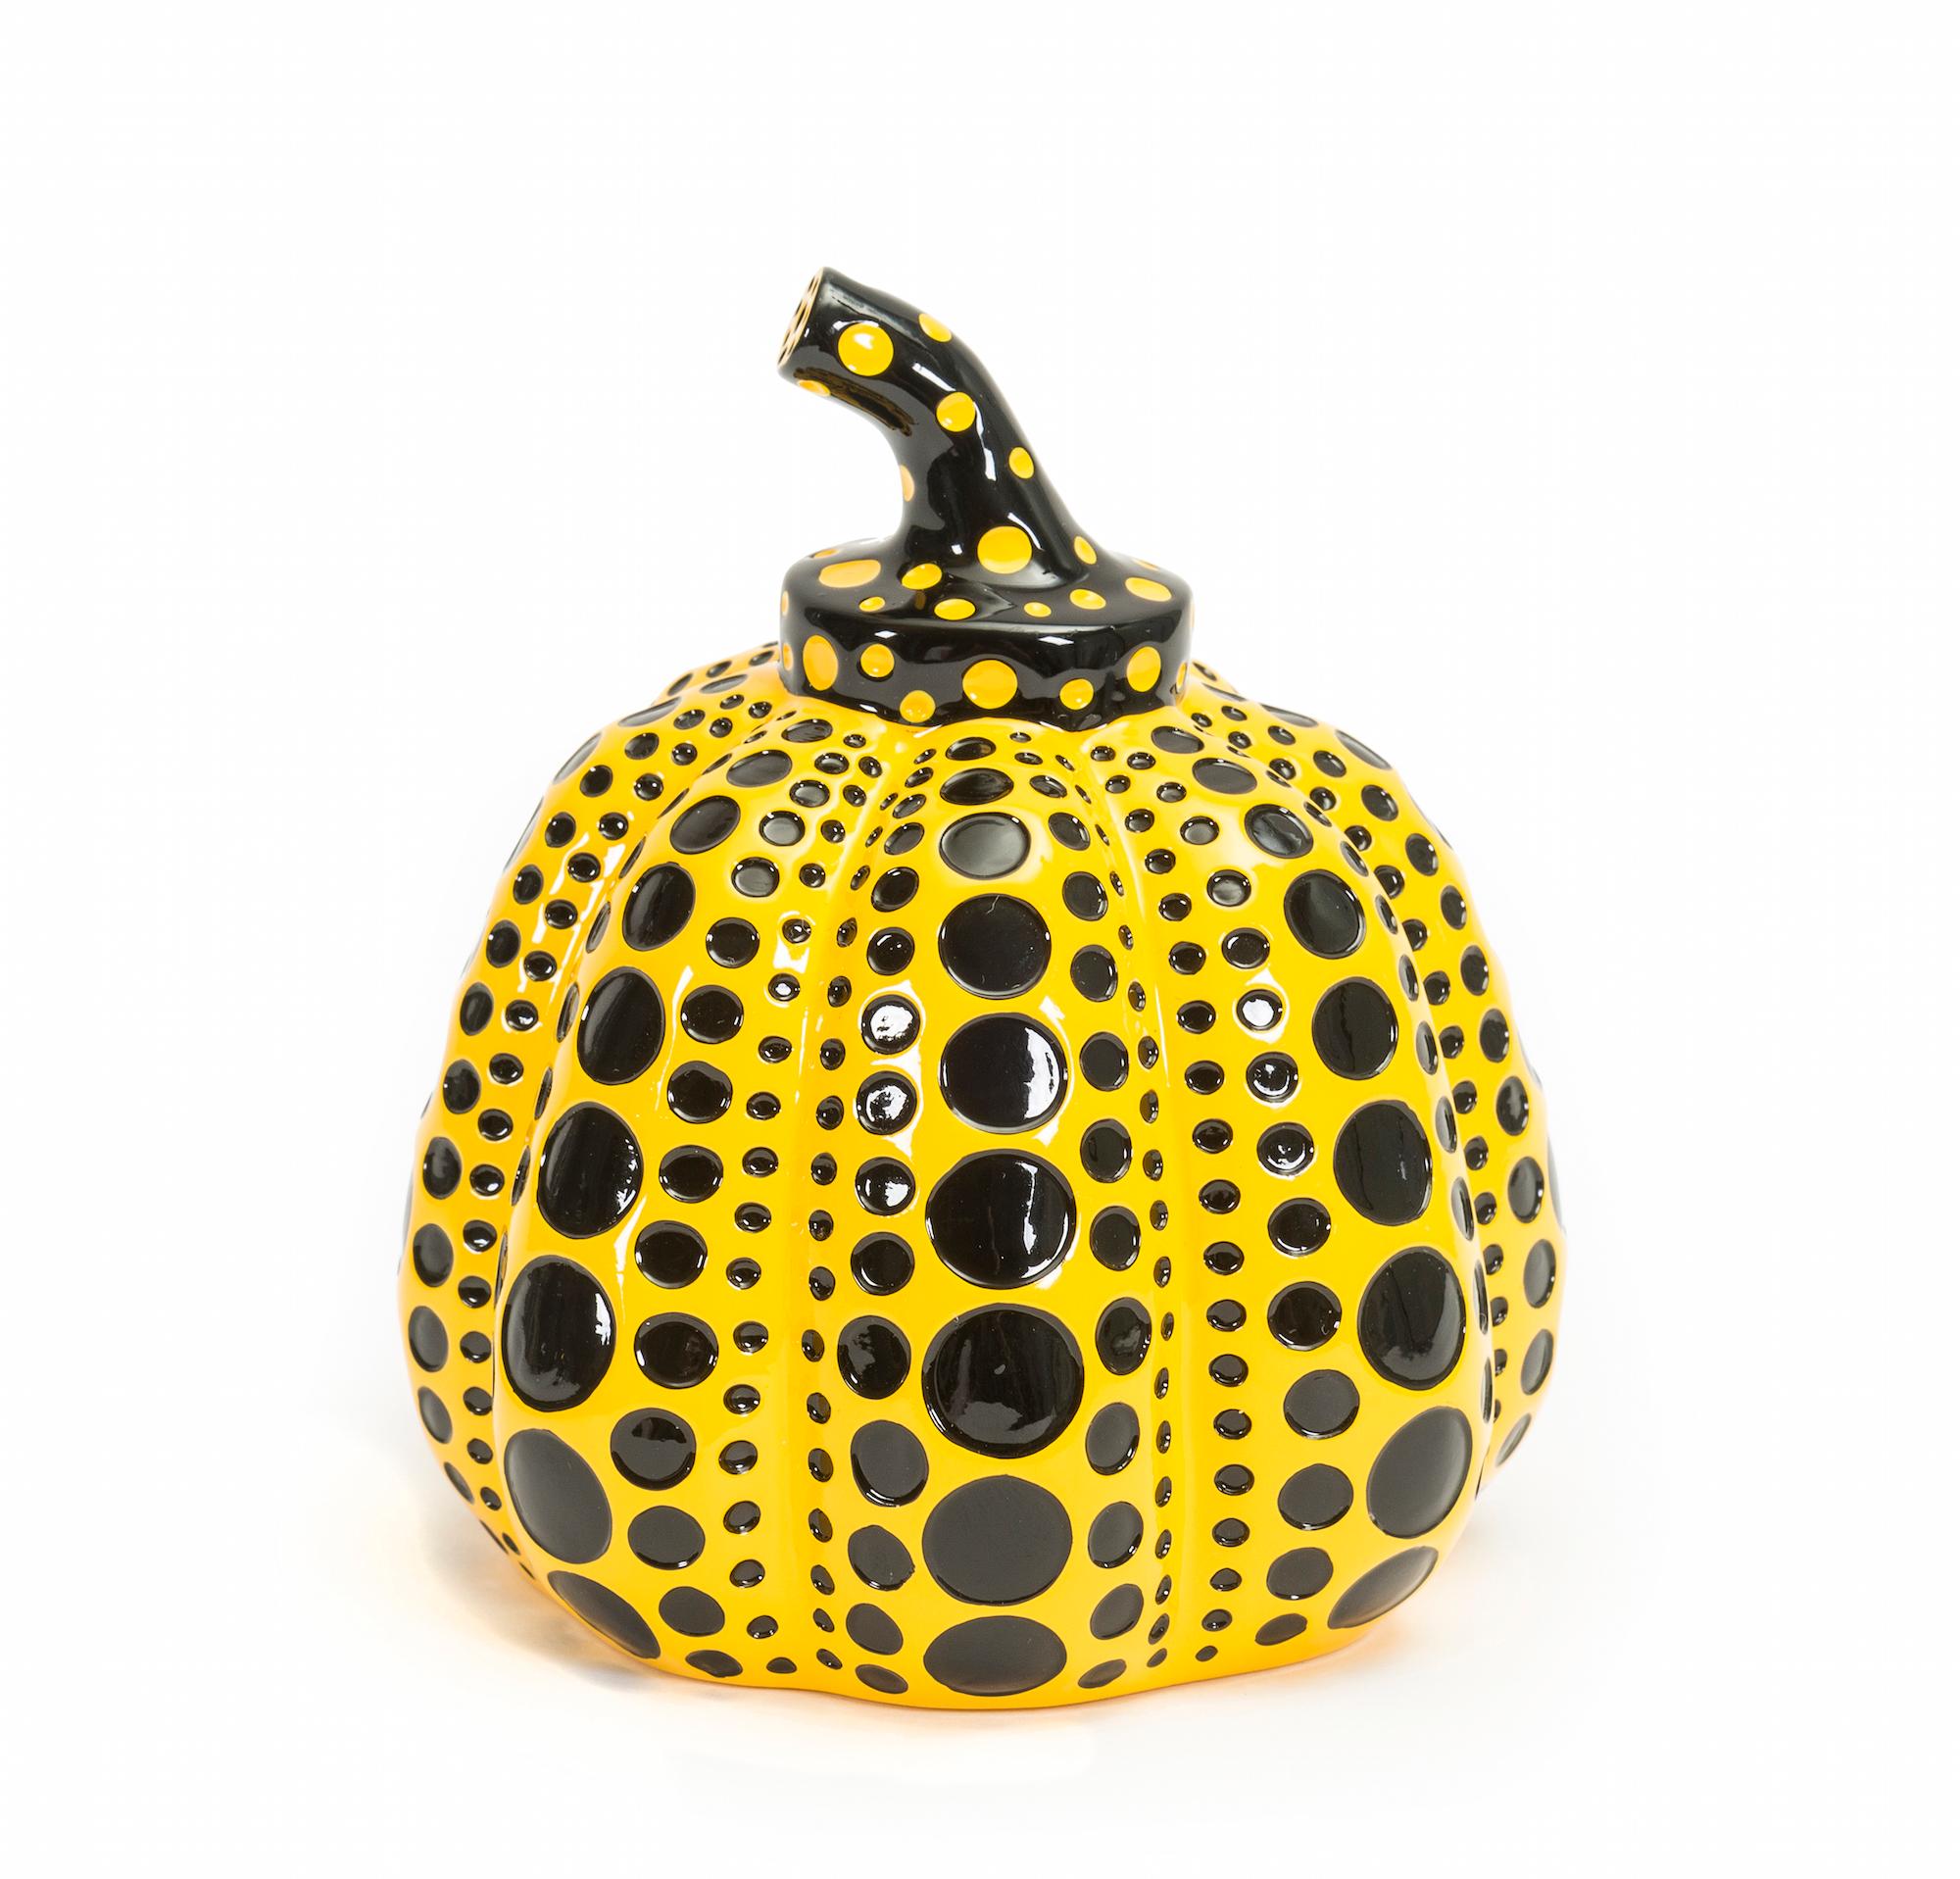 Pumpkin Objects (Pair White & Yellow) -- Sculptures, multiples by Yayoi Kusama 2